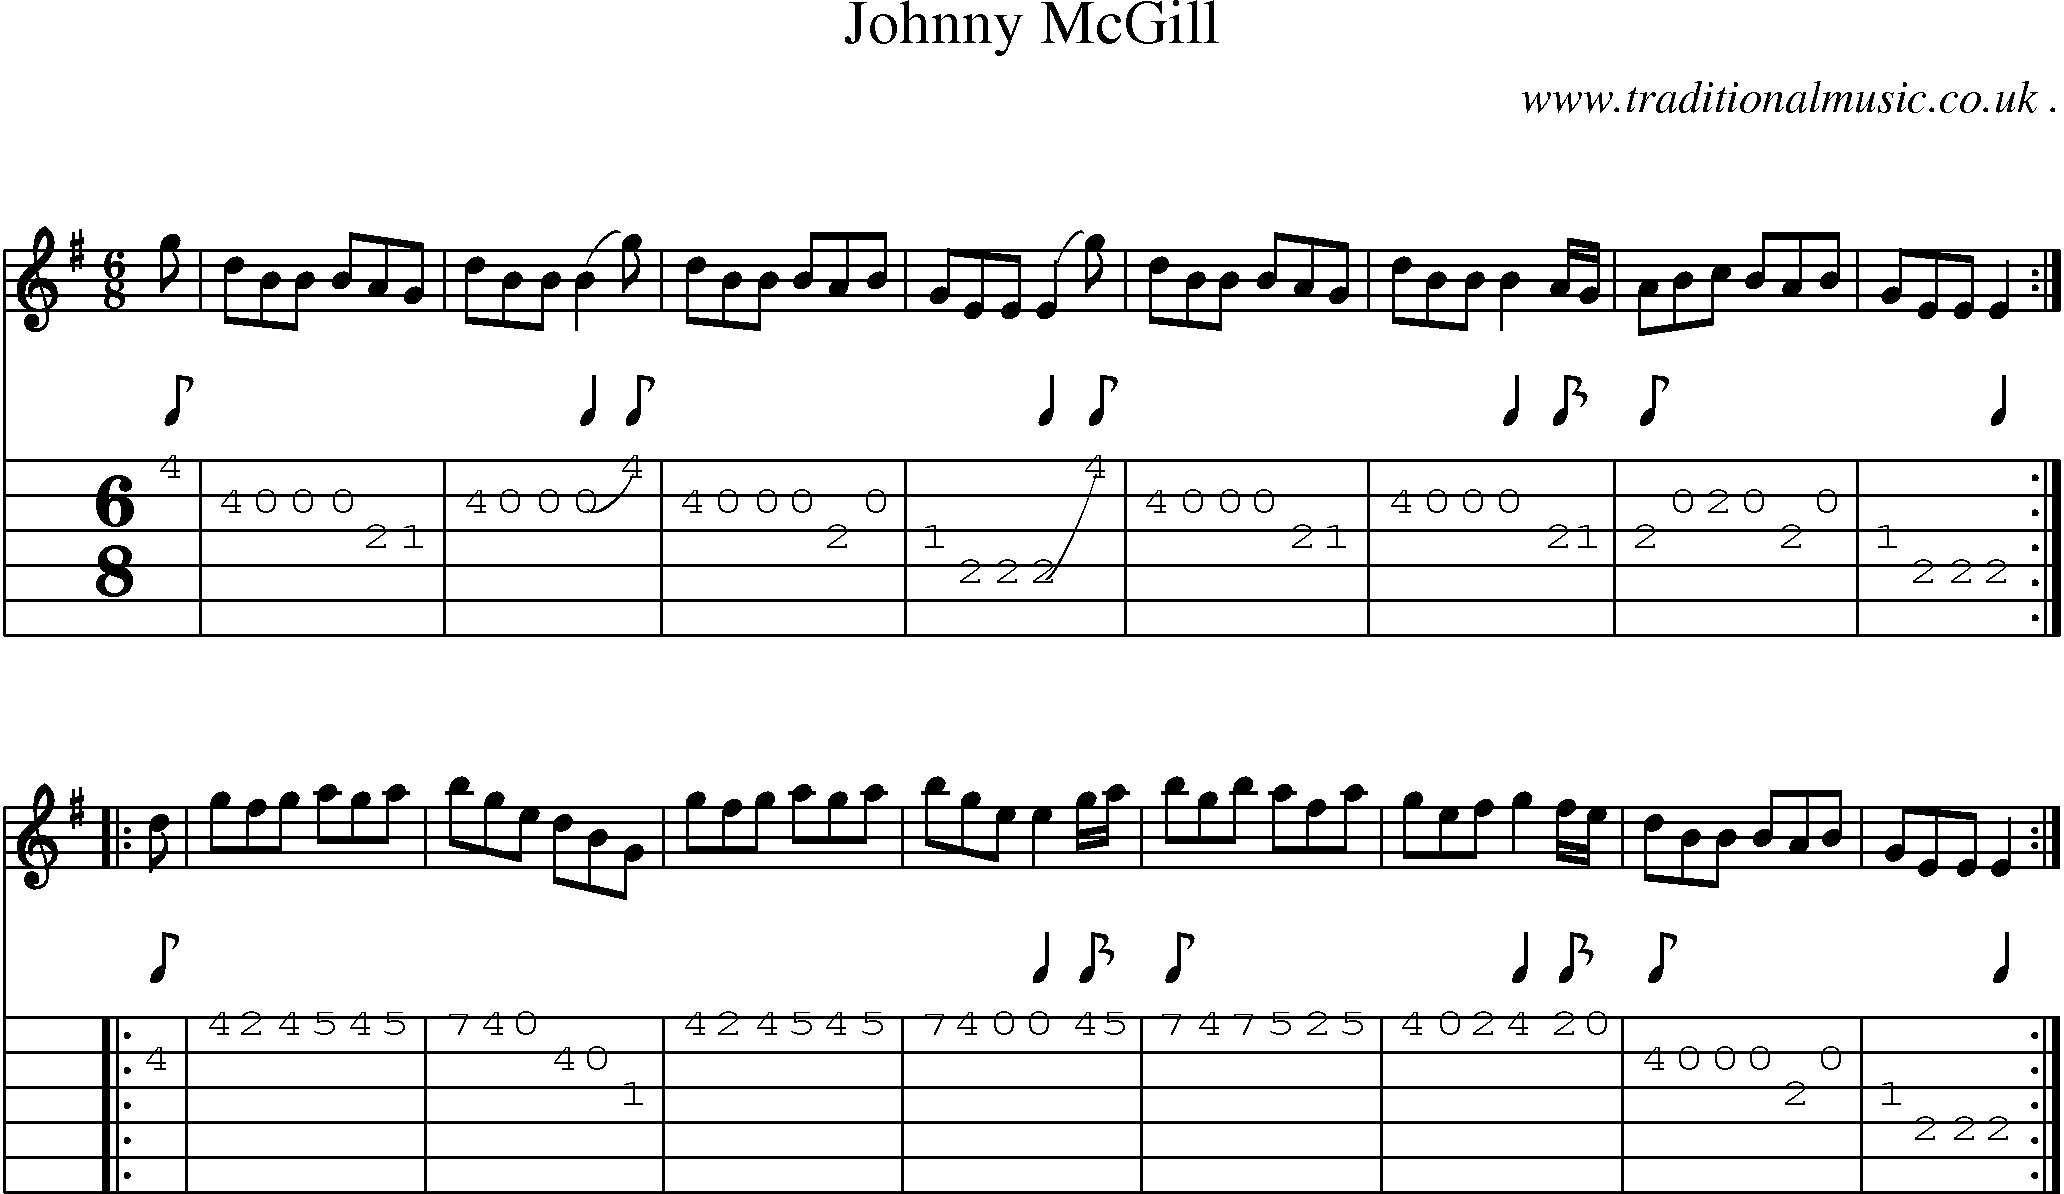 Sheet-music  score, Chords and Guitar Tabs for Johnny Mcgill